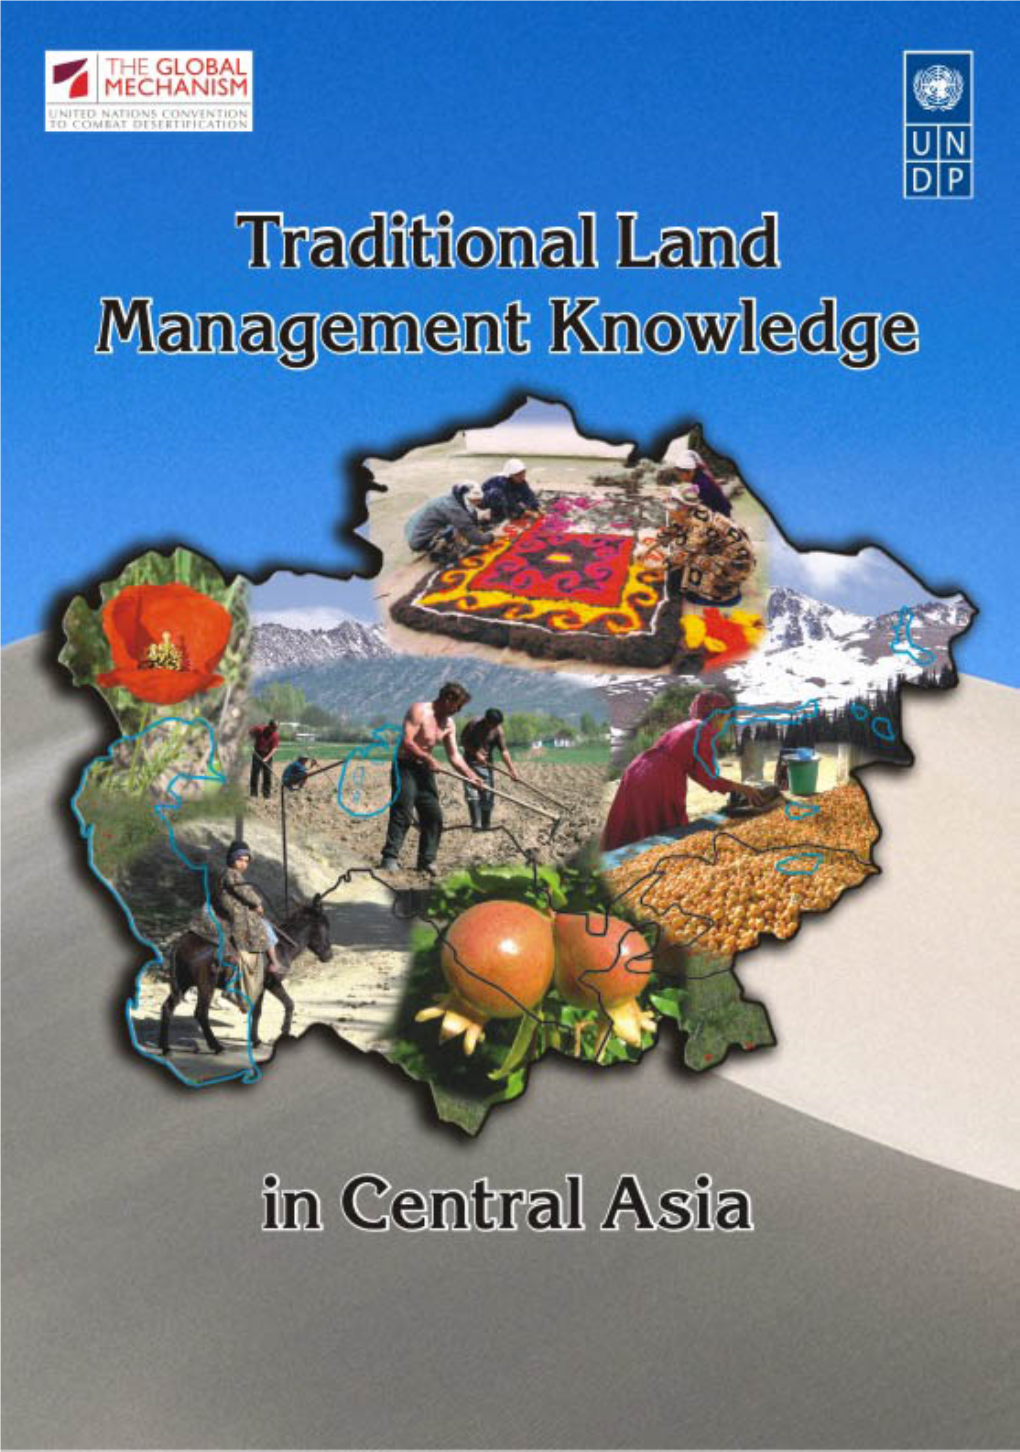 2. Land Use in Central Asia 2.1